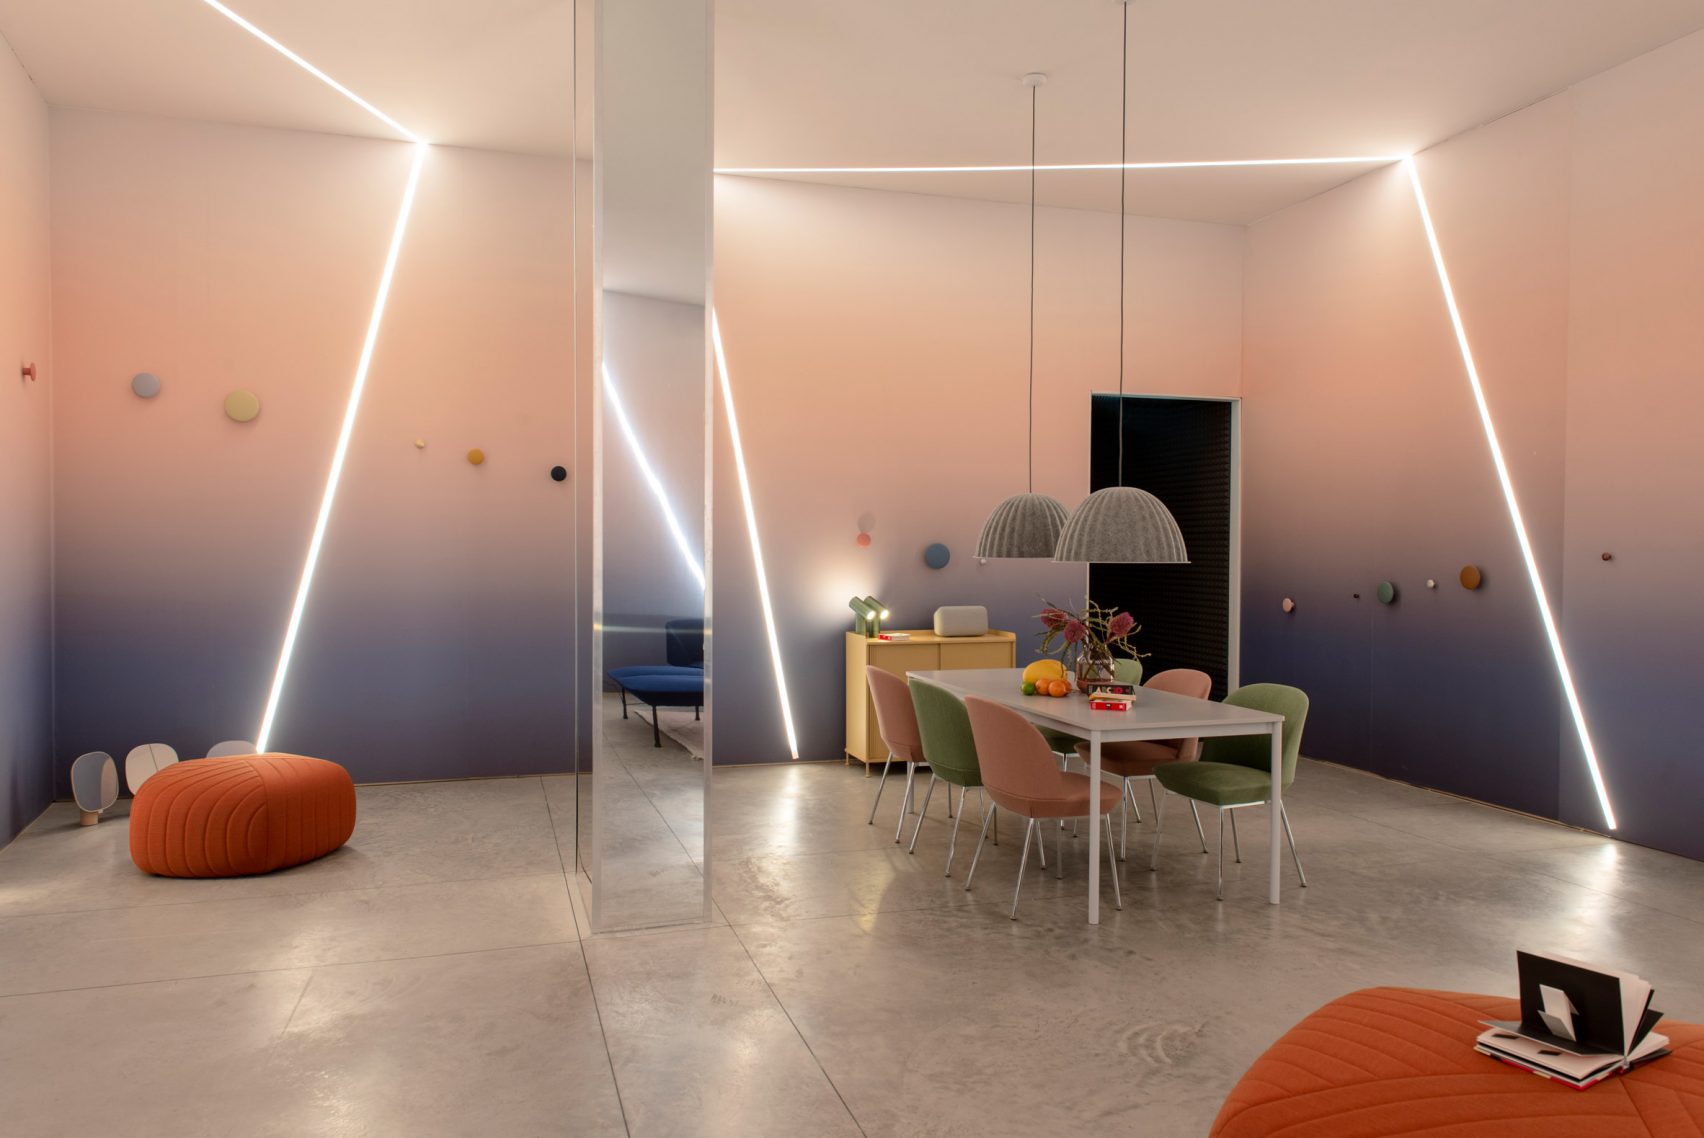   The second room, Vital, has a more playful design  